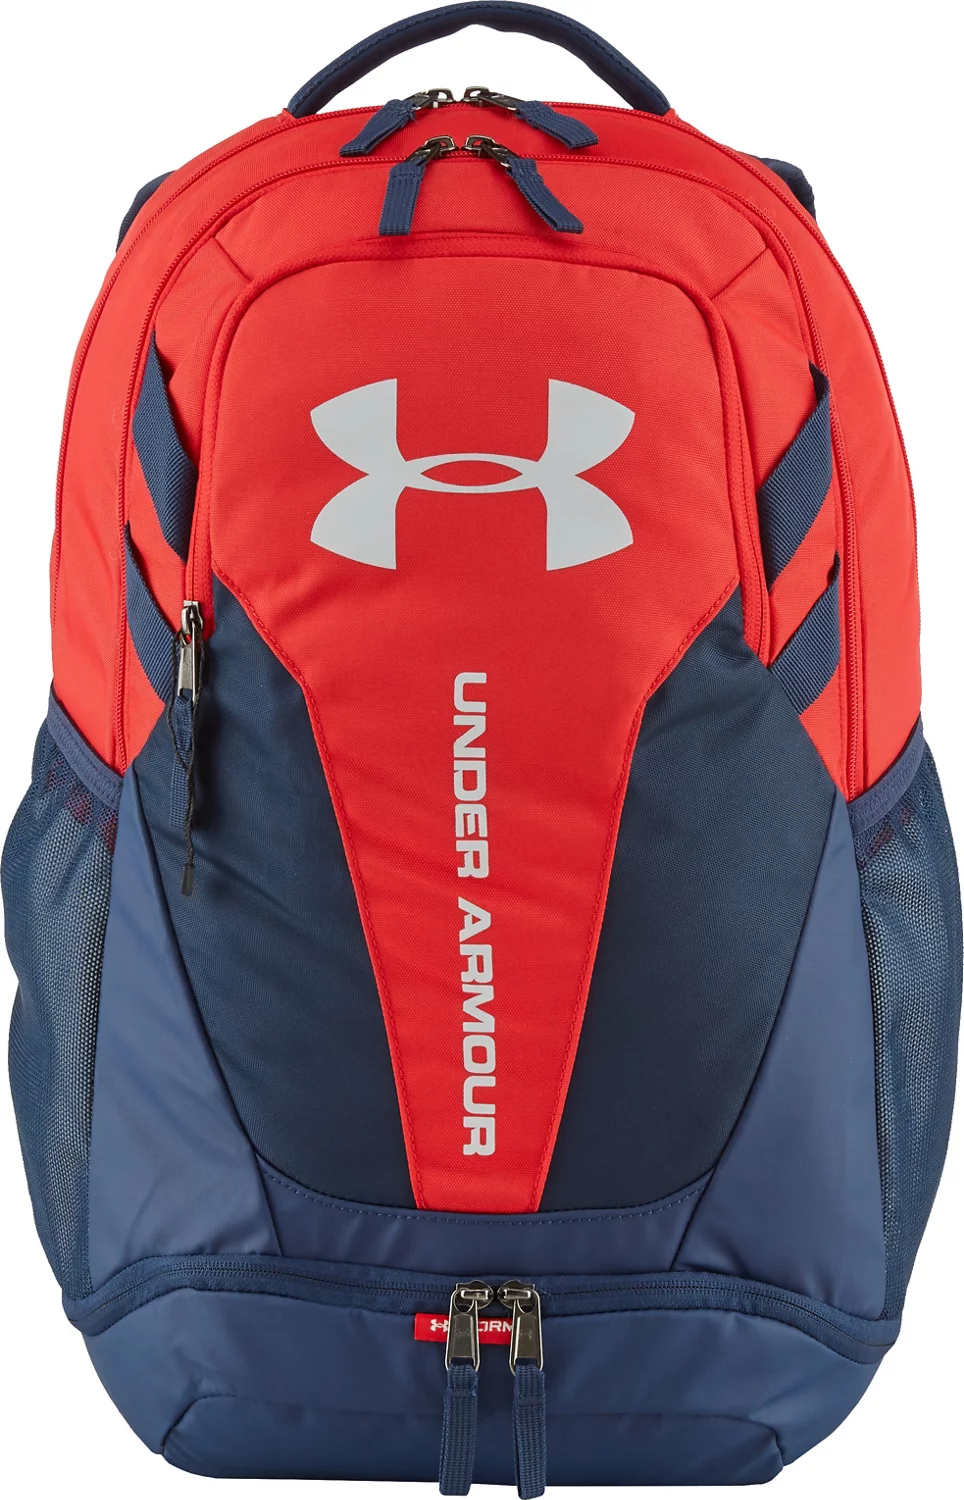 mint under armour backpack Sale,up to 